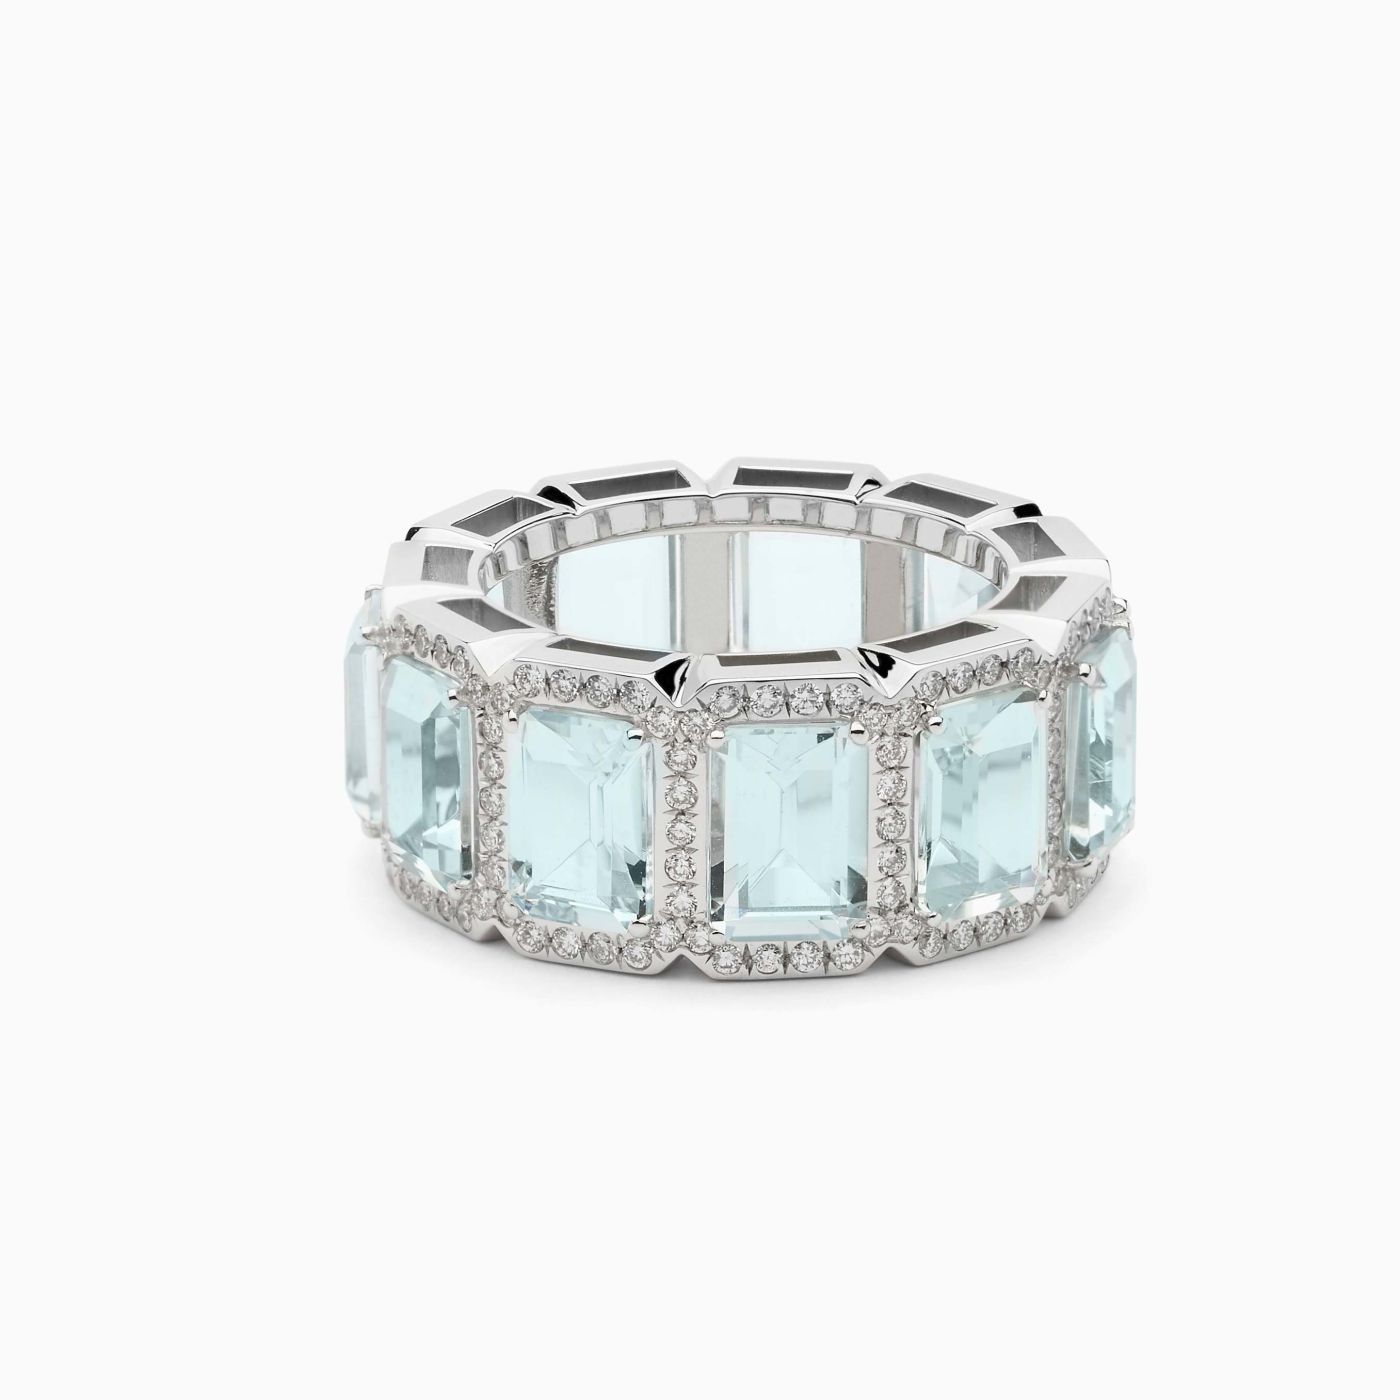 White gold with aquamarines with octagonal size and border with diamonds ring